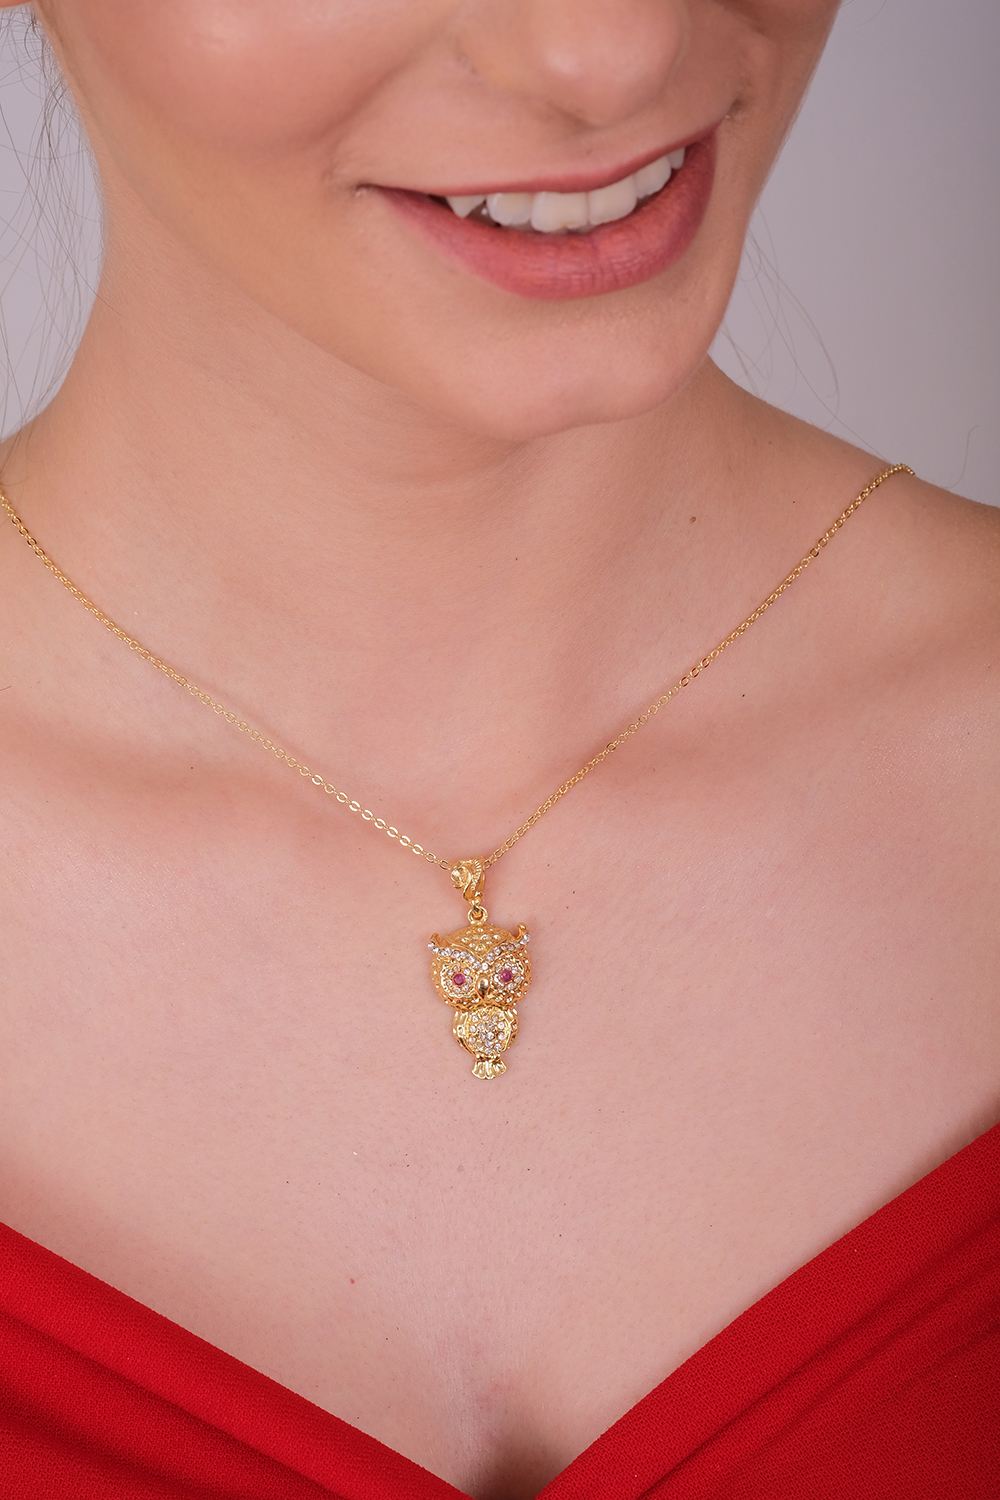 ATHENA Necklace-Gold Plated